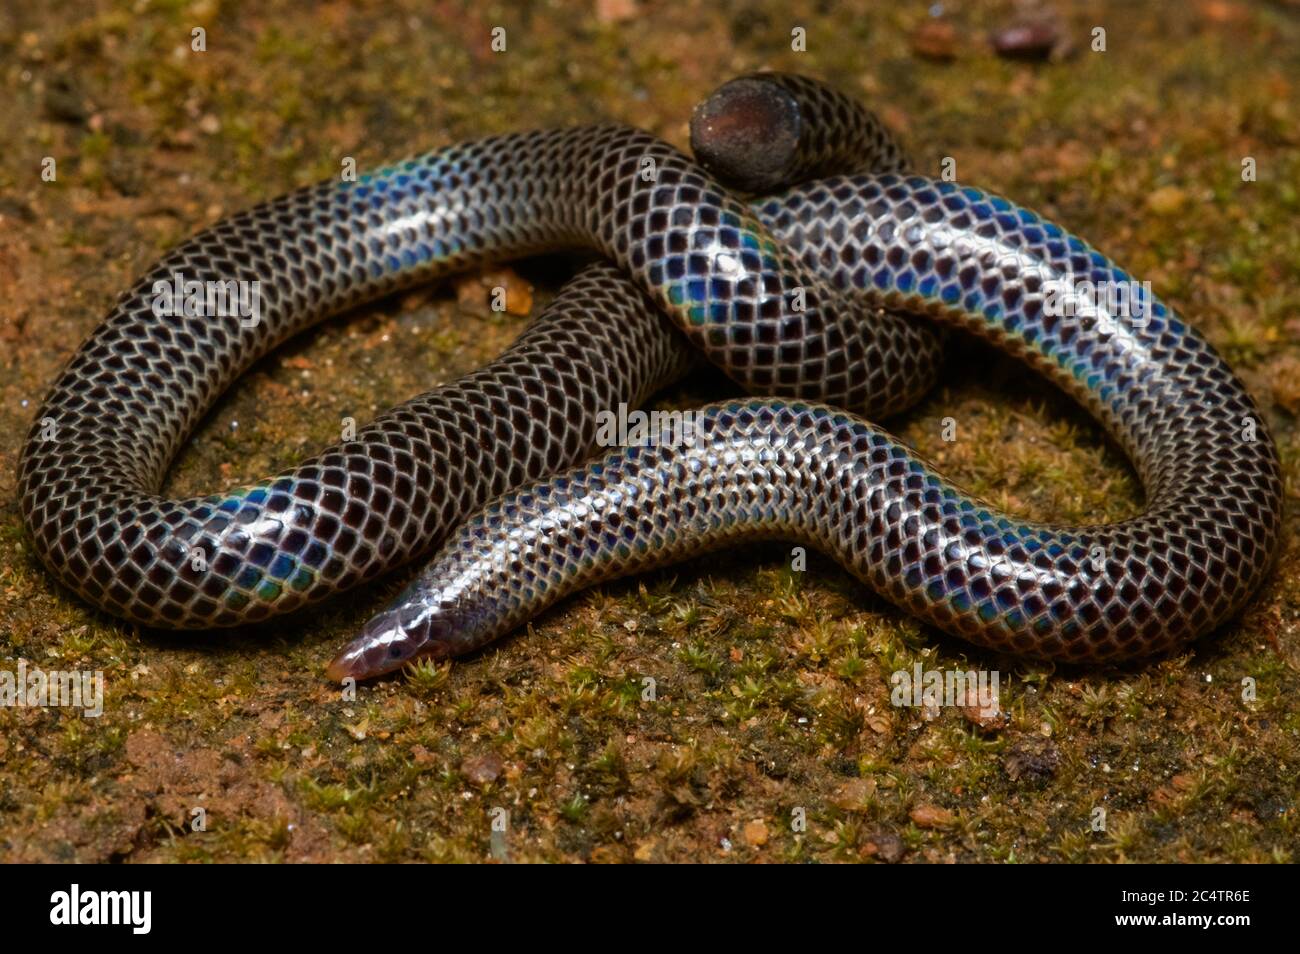 A Cuvier's Earth Snake (Rhinophis philippinus) on sandy ground near Knuckles Forest Reserve, Sri Lanka Stock Photo